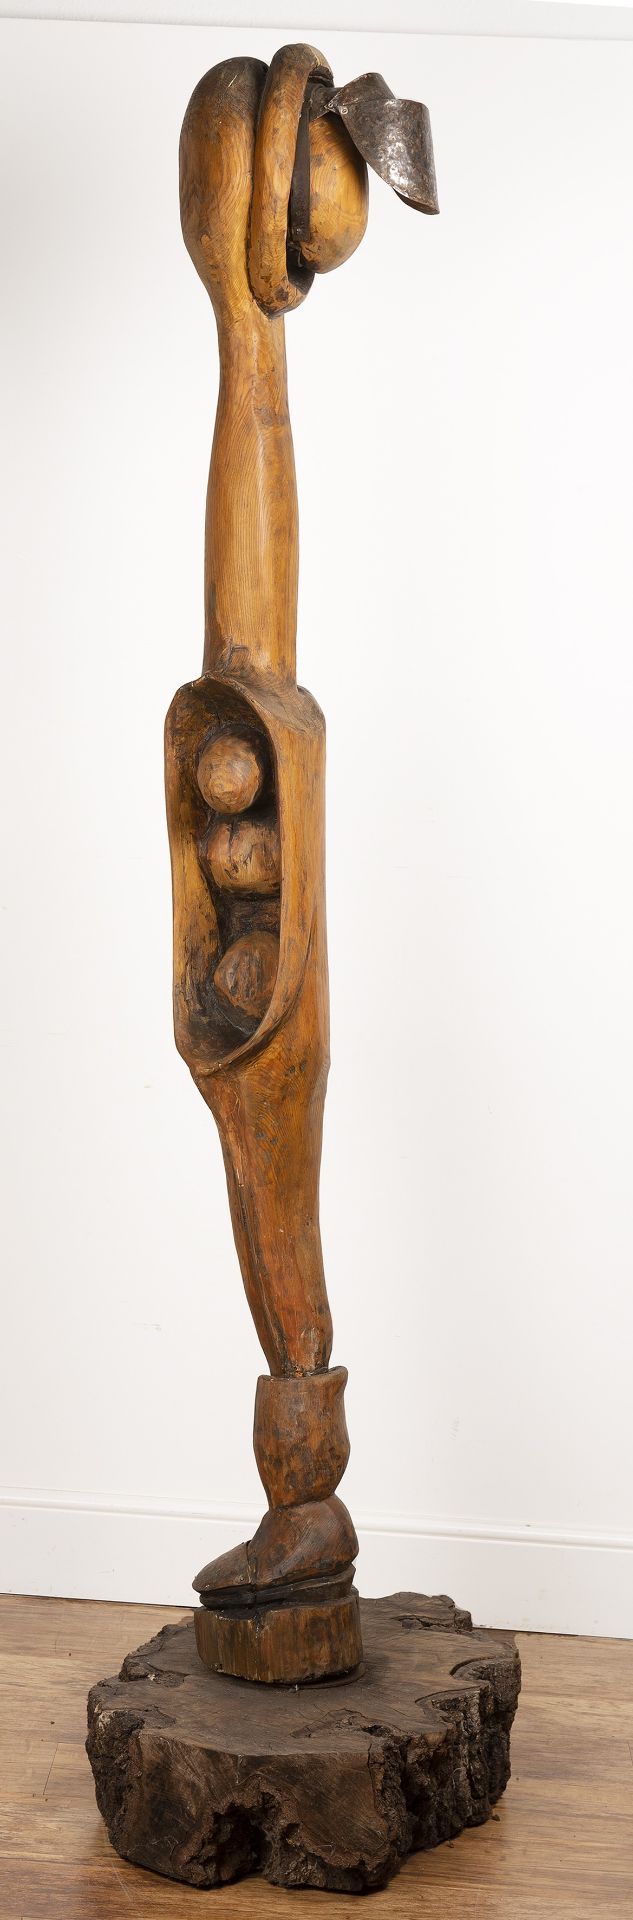 Natasha Houseago (Contemporary) 'Untitled figural sculpture', carved wood sculpture, on wooden base, - Image 2 of 3